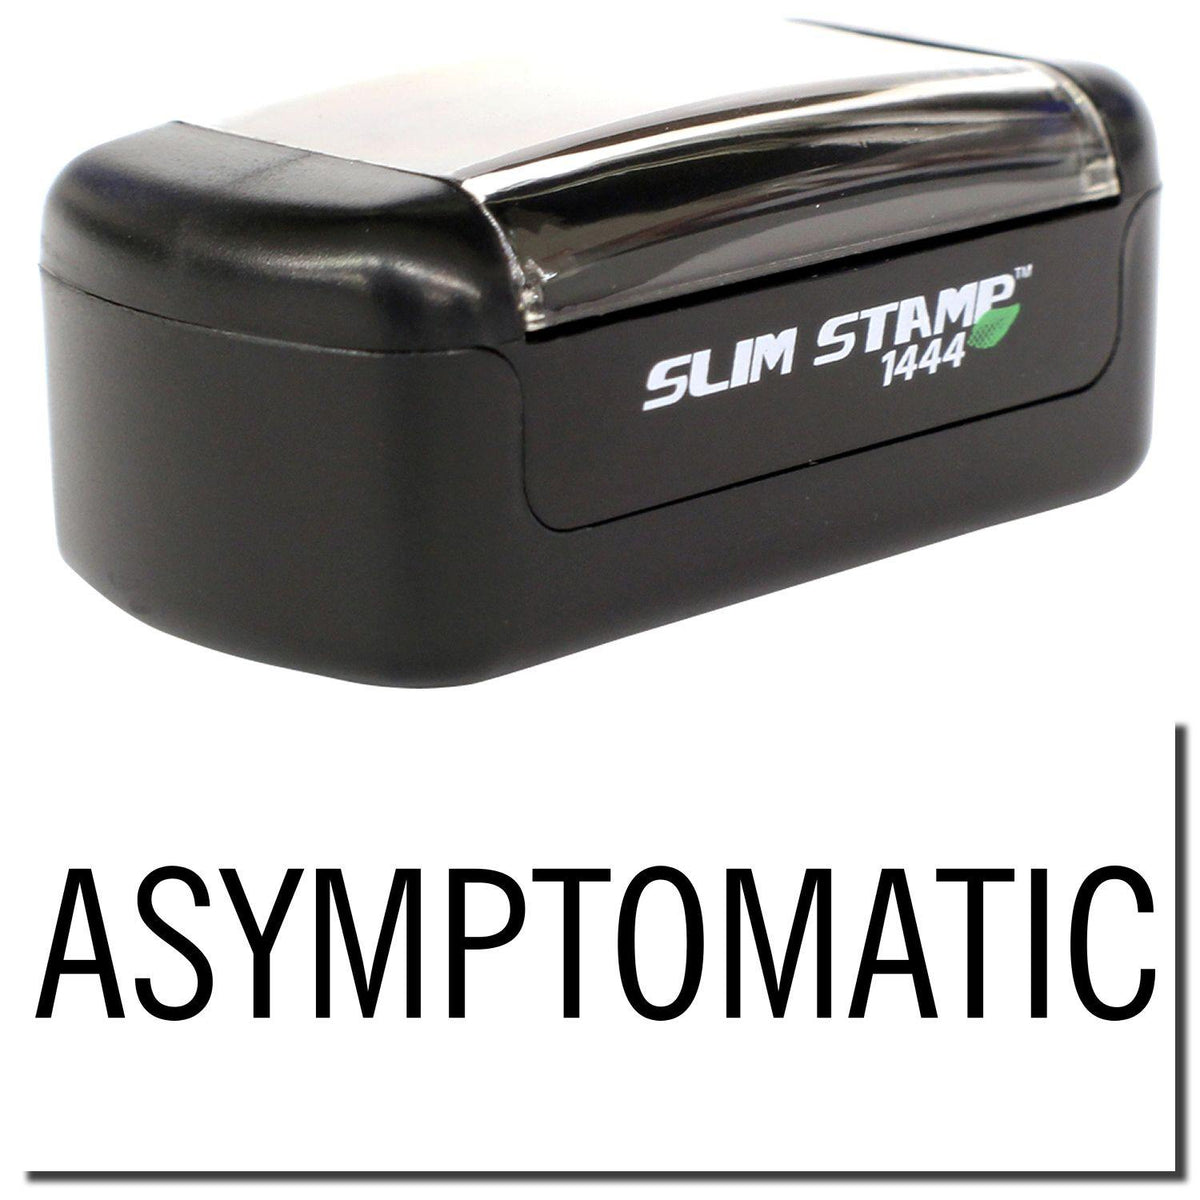 A stock office pre-inked stamp with a stamped image showing how the text &quot;ASYMPTOMATIC&quot; is displayed after stamping.